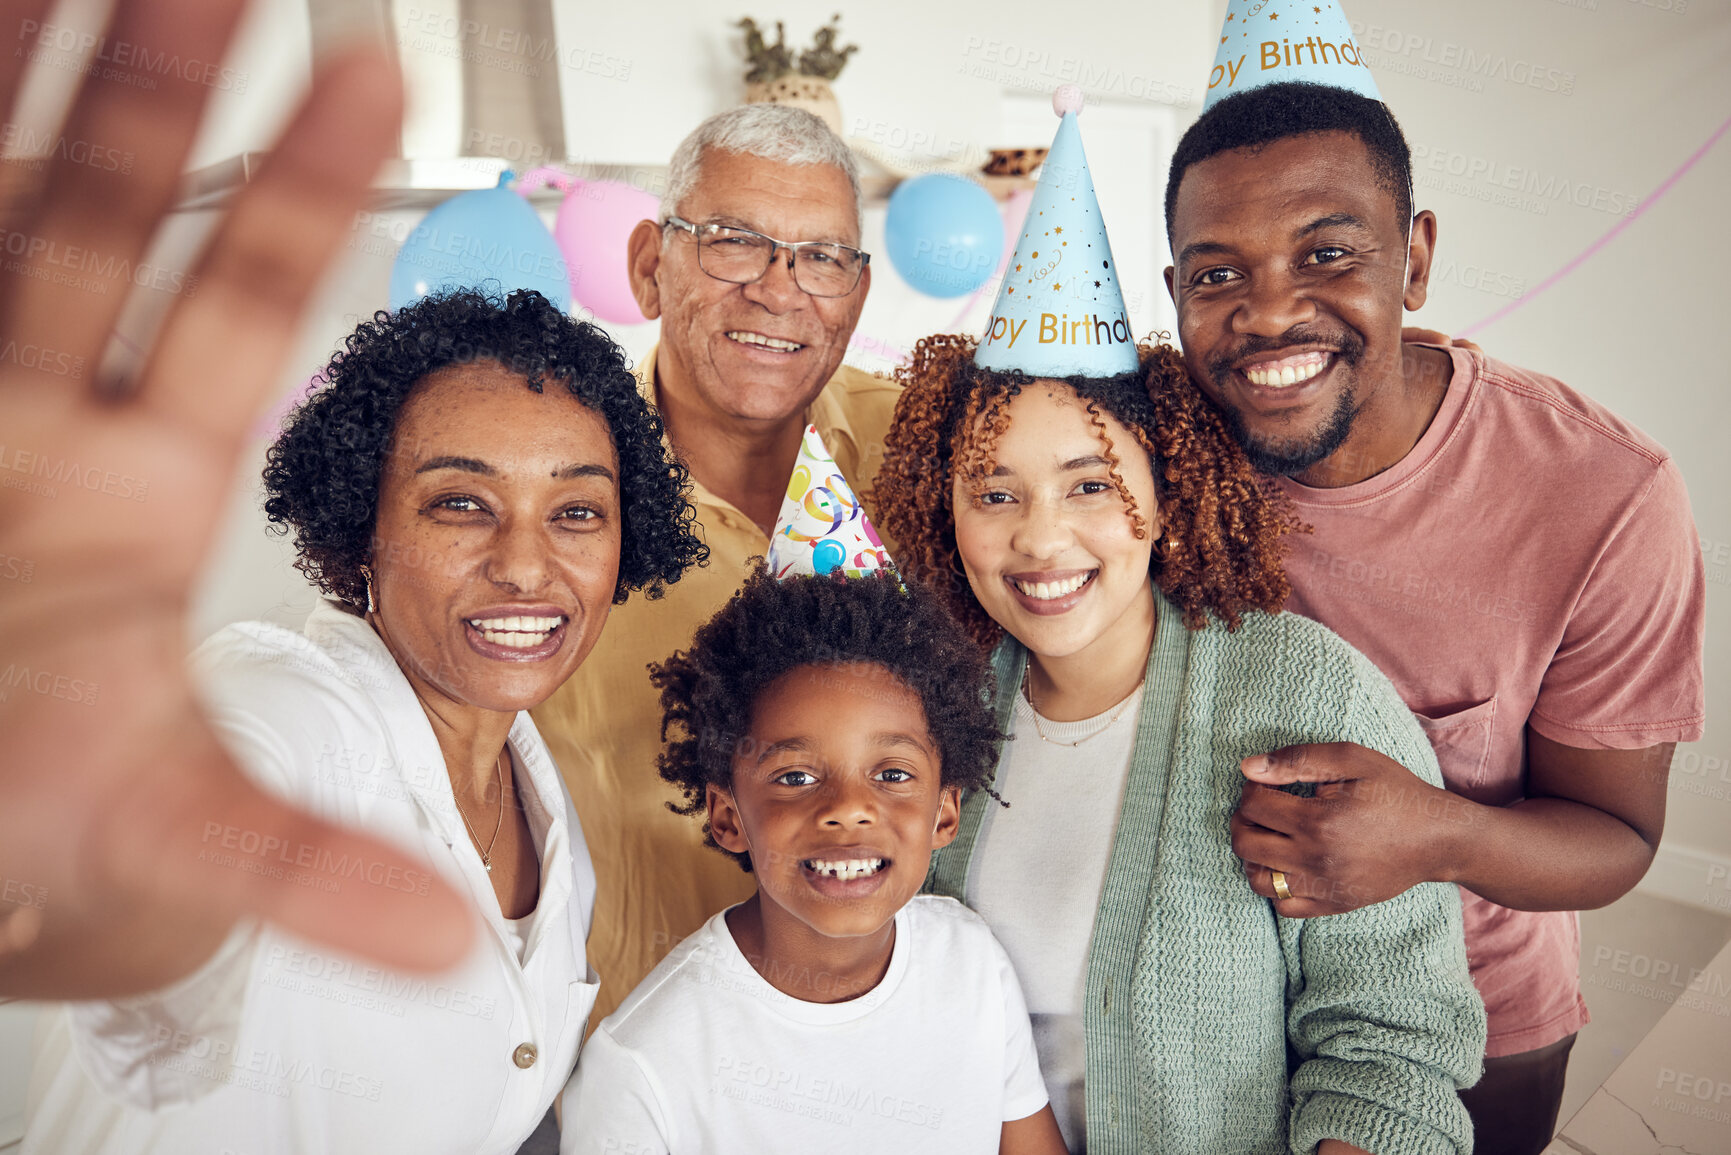 Buy stock photo Big family, selfie smile and birthday portrait in home, having fun at party or celebration. Interracial, love or father, mother and kid with grandparents taking photo for happy memory or social media